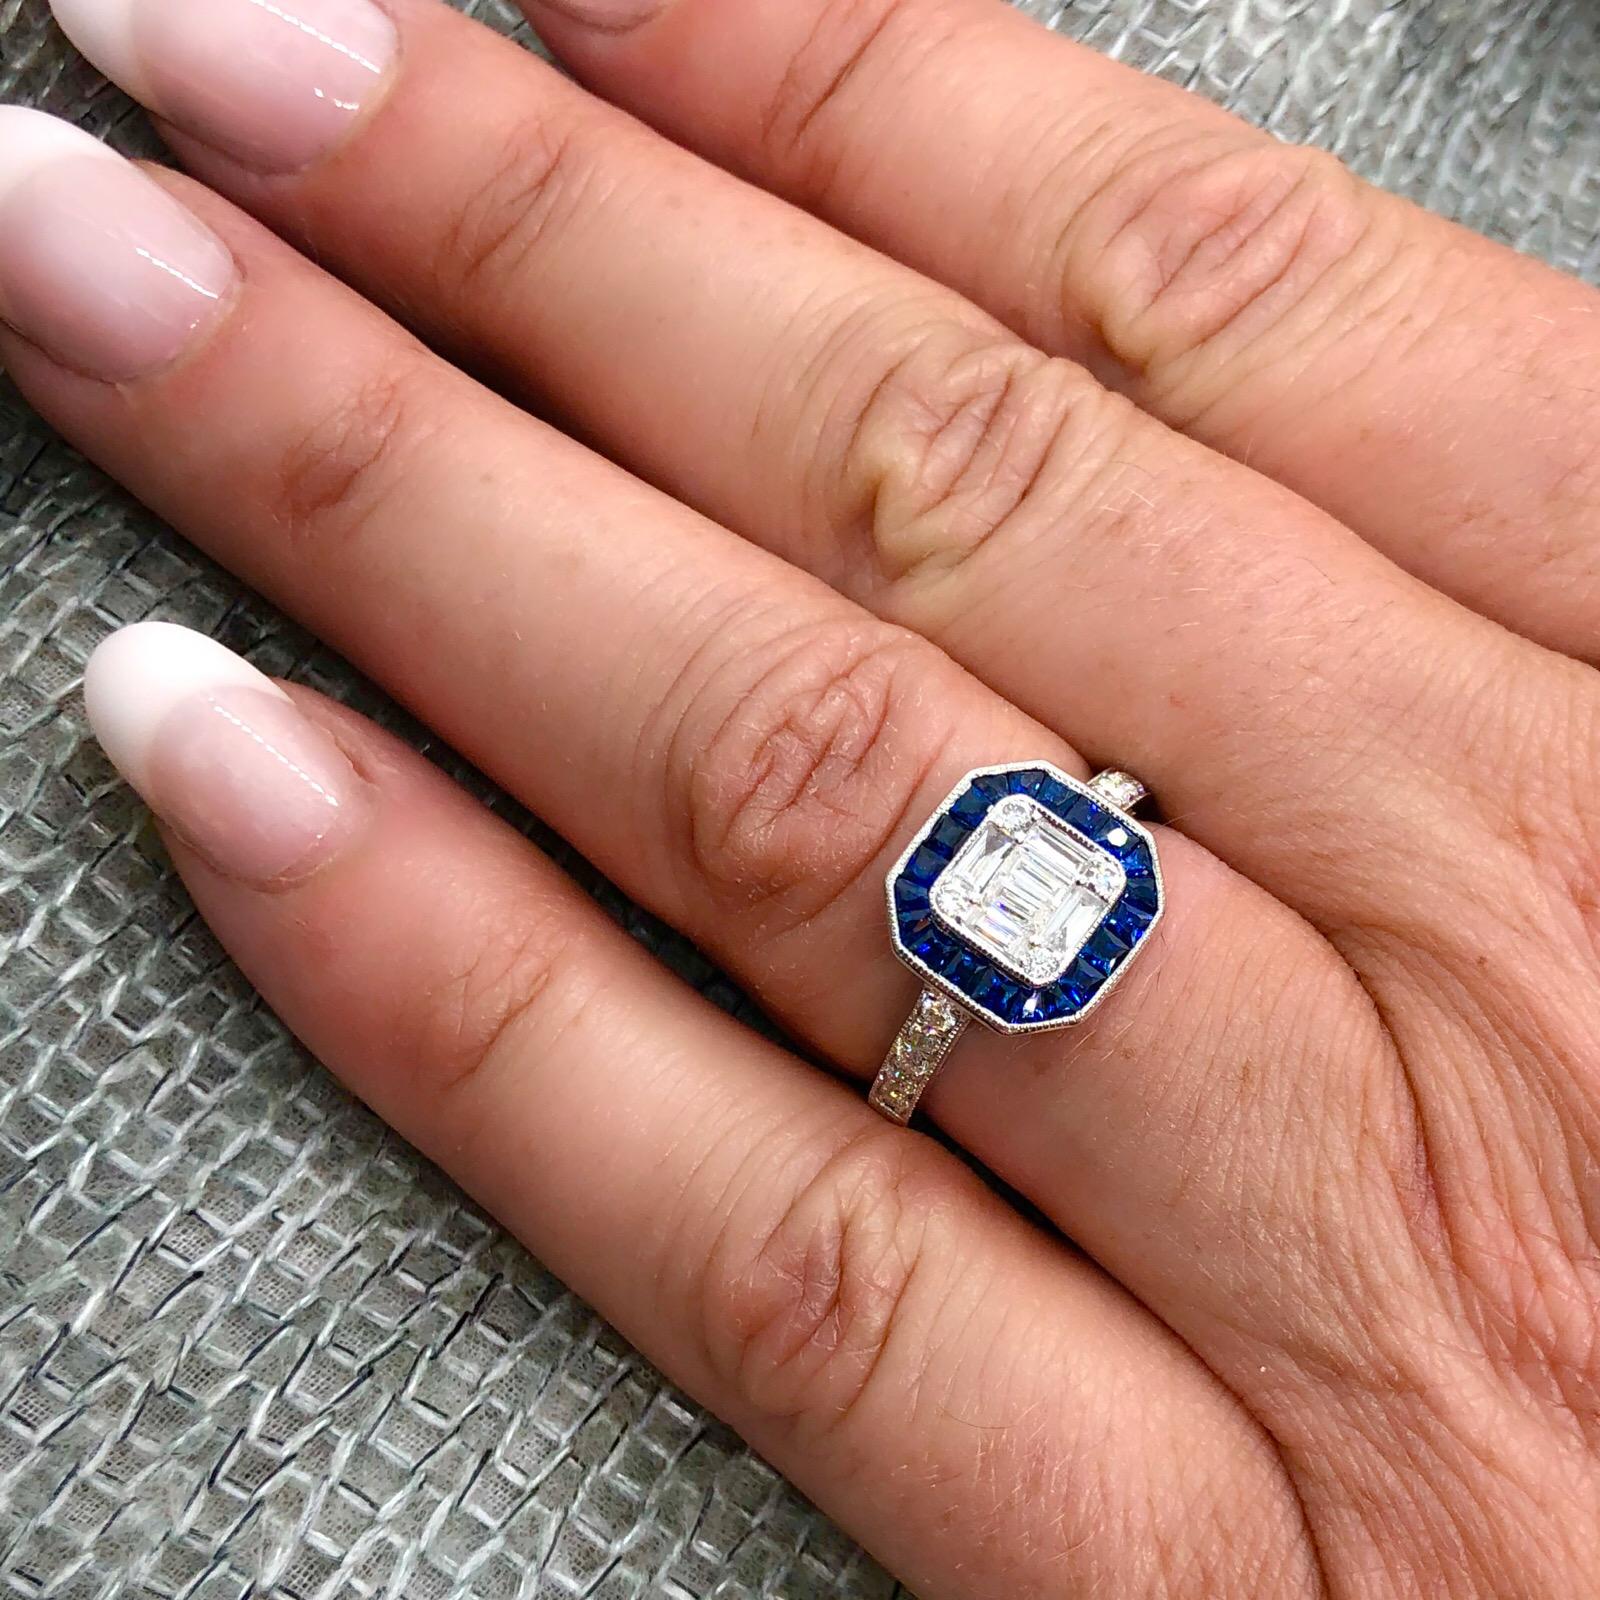 Enjoy the elegance of the deco era with this 18k white gold ring. Set with baguette and round brilliant-cut diamonds, framed with an octagonal halo of square-cut sapphires, the ring has a low profile perfect for everyday wear. The total diamond